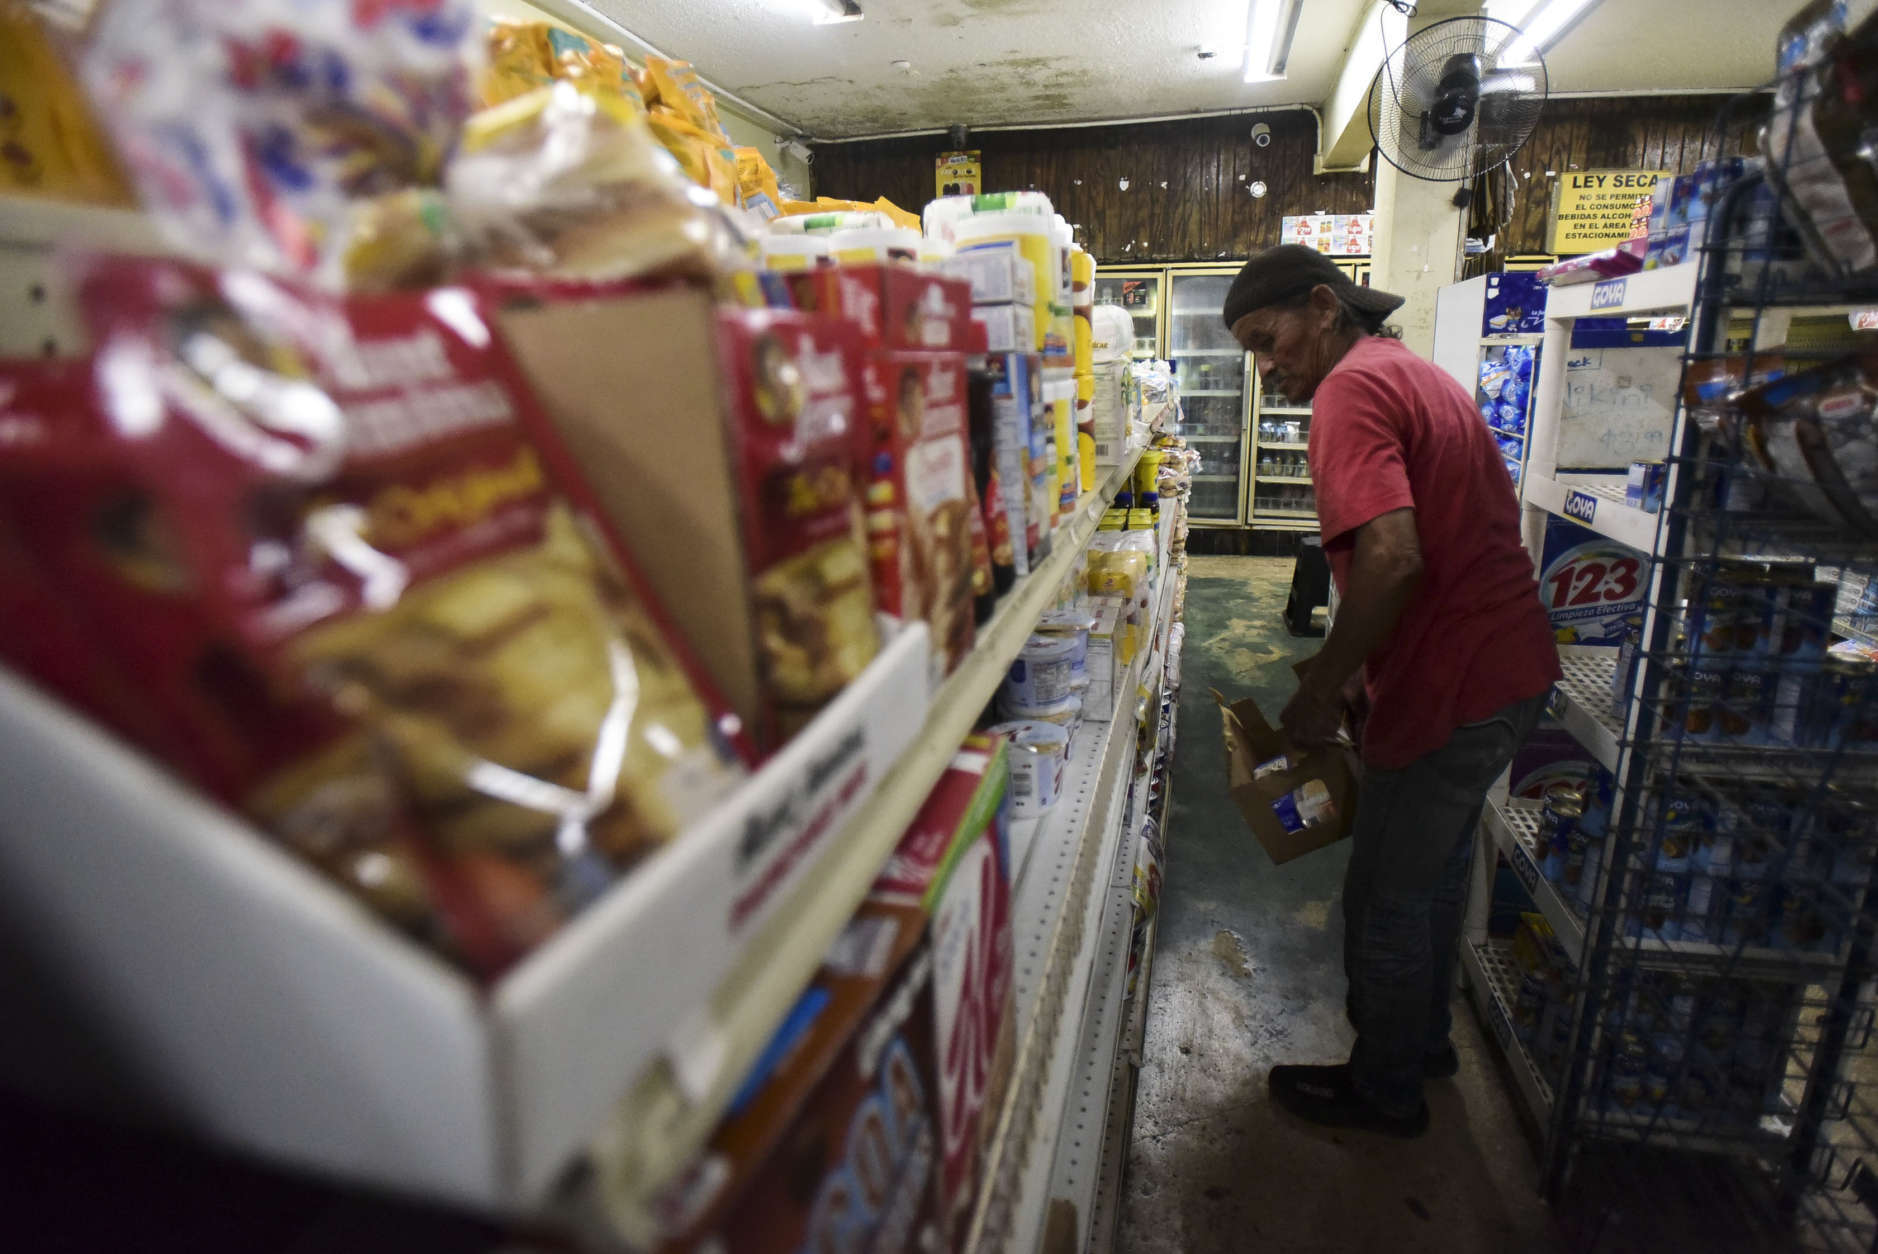 Residents from Juana Matos buy groceries at Catano Mini Market in the middle of a supply shortage caused by the passage of Hurricane Maria, in Catano, Puerto Rico, Wednesday, Sept. 27, 2017. The aftermath of the powerful storm has resulted in a near-total shutdown of the Puerto Rican economy that could last for weeks and has many people running seriously low on cash and deeply concerned that it will become even harder to survive on this storm-ravaged island. (AP Photo/Carlos Giusti)